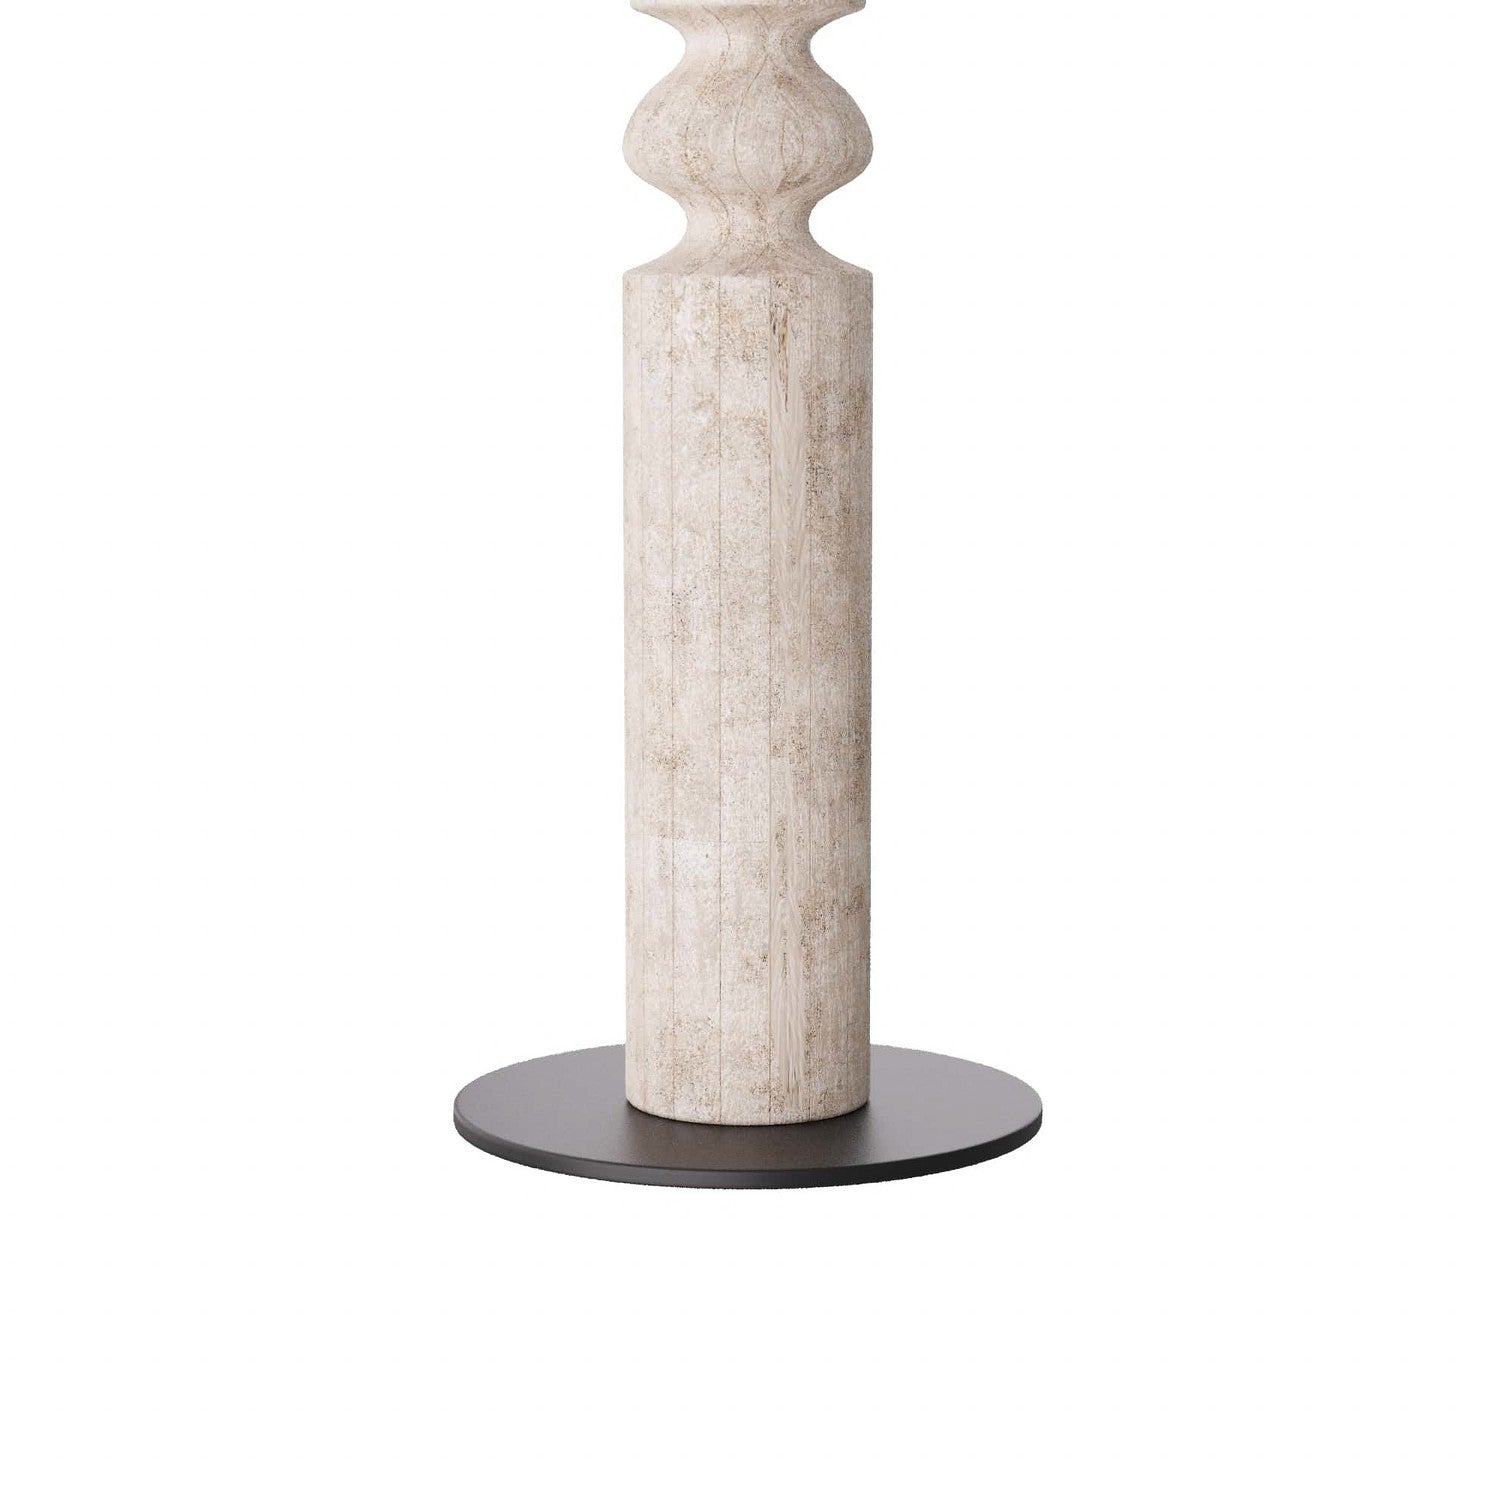 One Light Floor Lamp from the Woodrow collection in Limewash finish